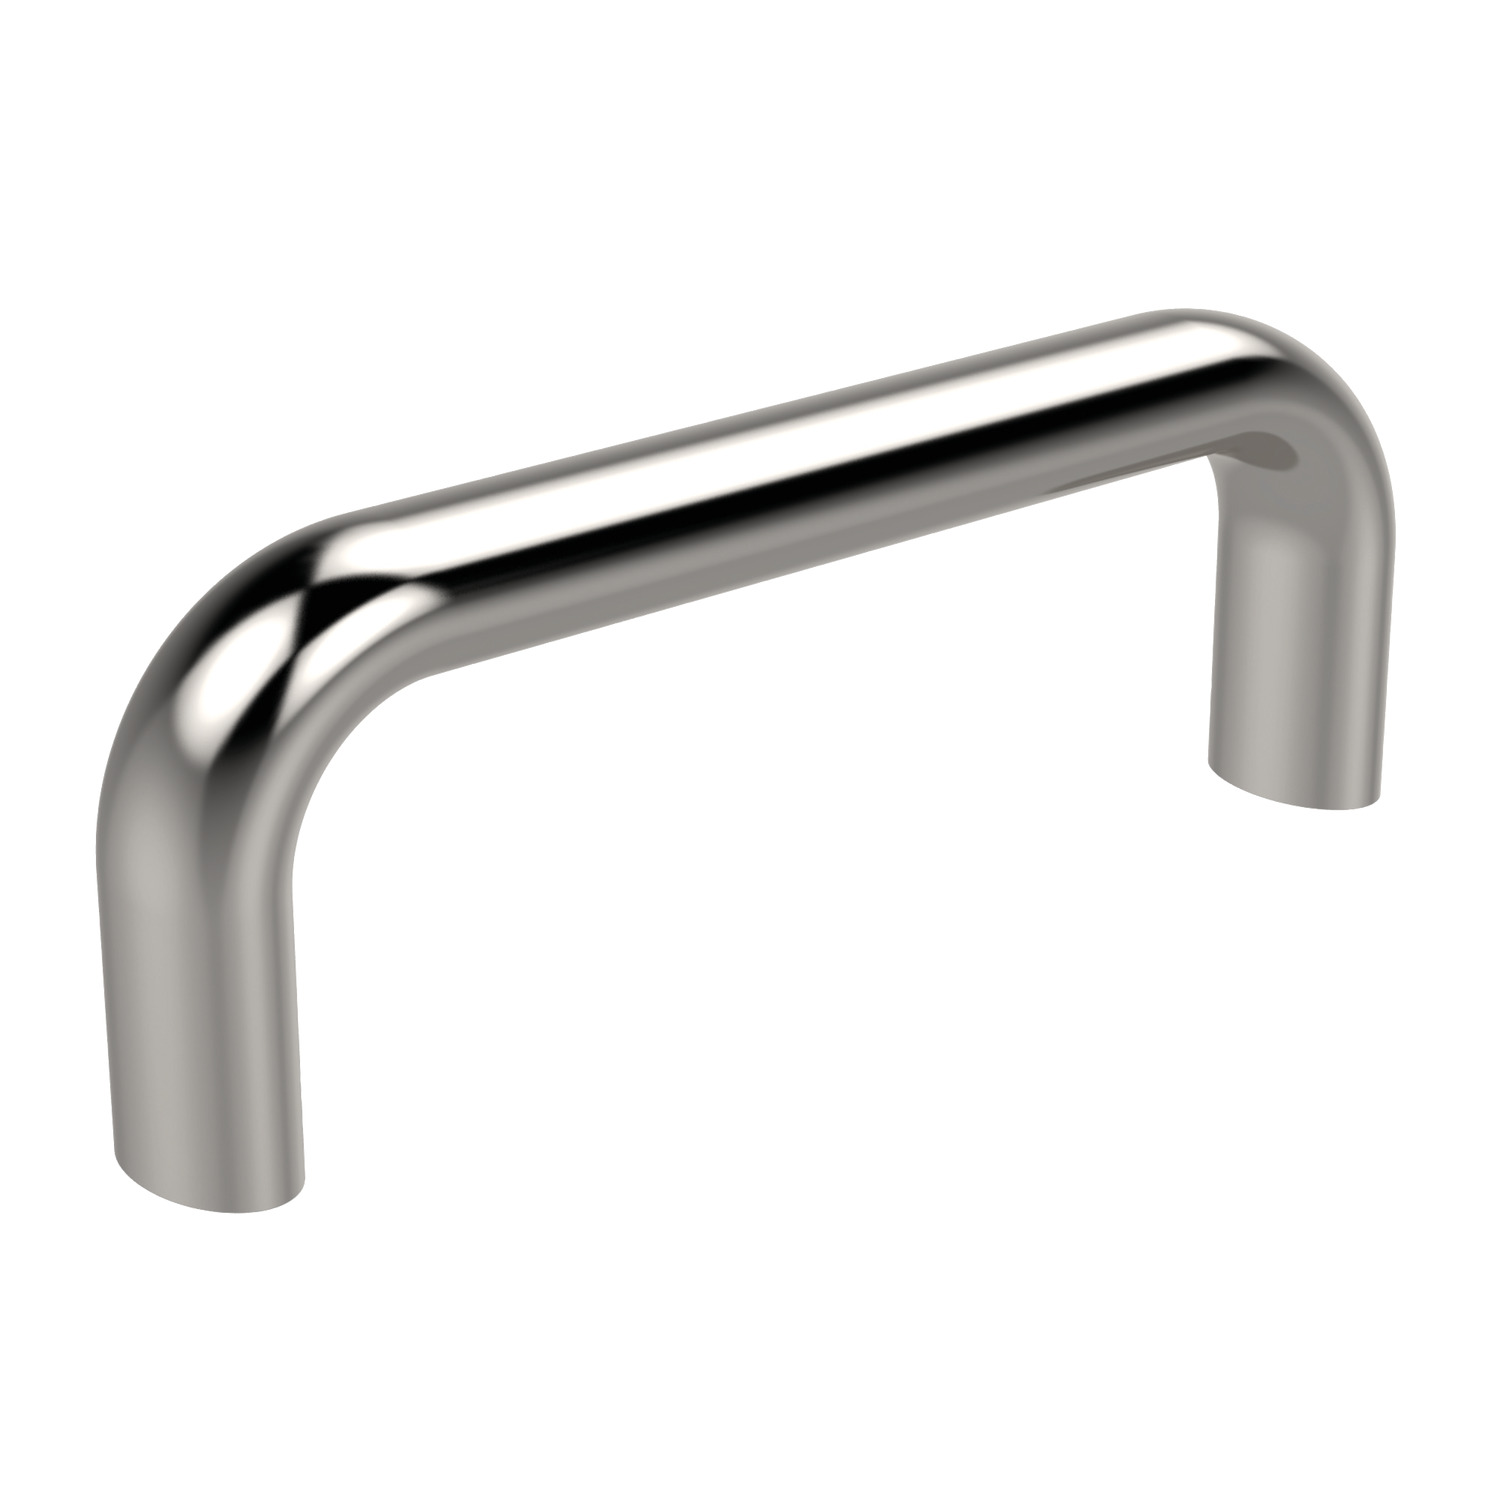 78910 - Pull Handles - Oval Type